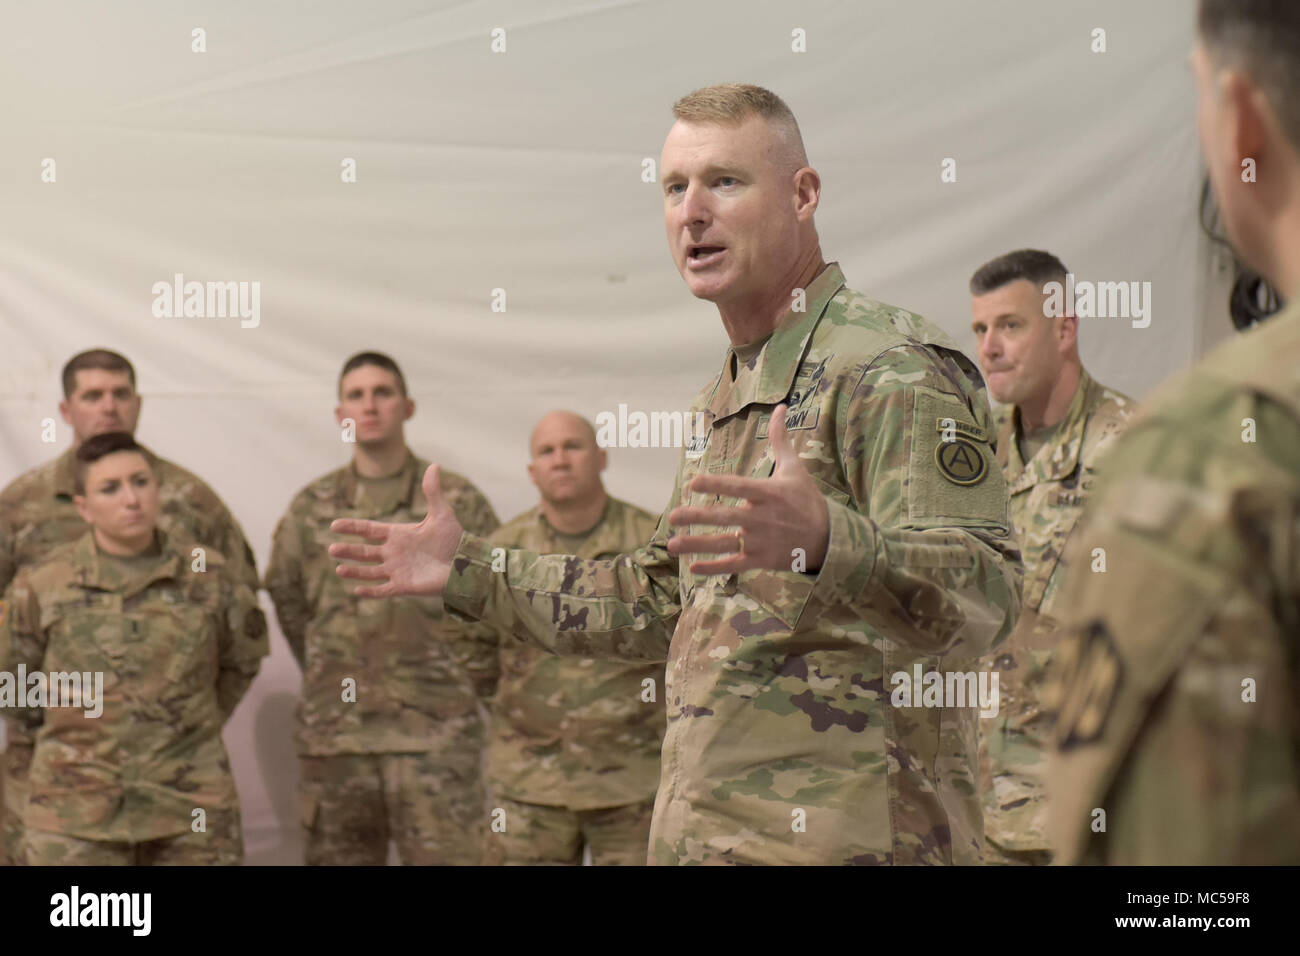 Maj. Gen. Terrence McKenrick, U.S. Army Central deputy commanding general, talks to Soldiers of the Massachusetts Army National Guard's 151st Regional Support Group Jan. 30, 2018, at Fort Hood, Texas, where they are participating in a culminating training exercise with First Army for the Pennsylvania Army National Guard's 28th Infantry Division. Both units are preparing to deploy to the Middle East, where the 151st RSG Soldiers will augment the ARCENT staff, and the 28th ID Soldiers will support theater combat operations, Operation Spartan Shield, and theater security cooperation with the Unit Stock Photo